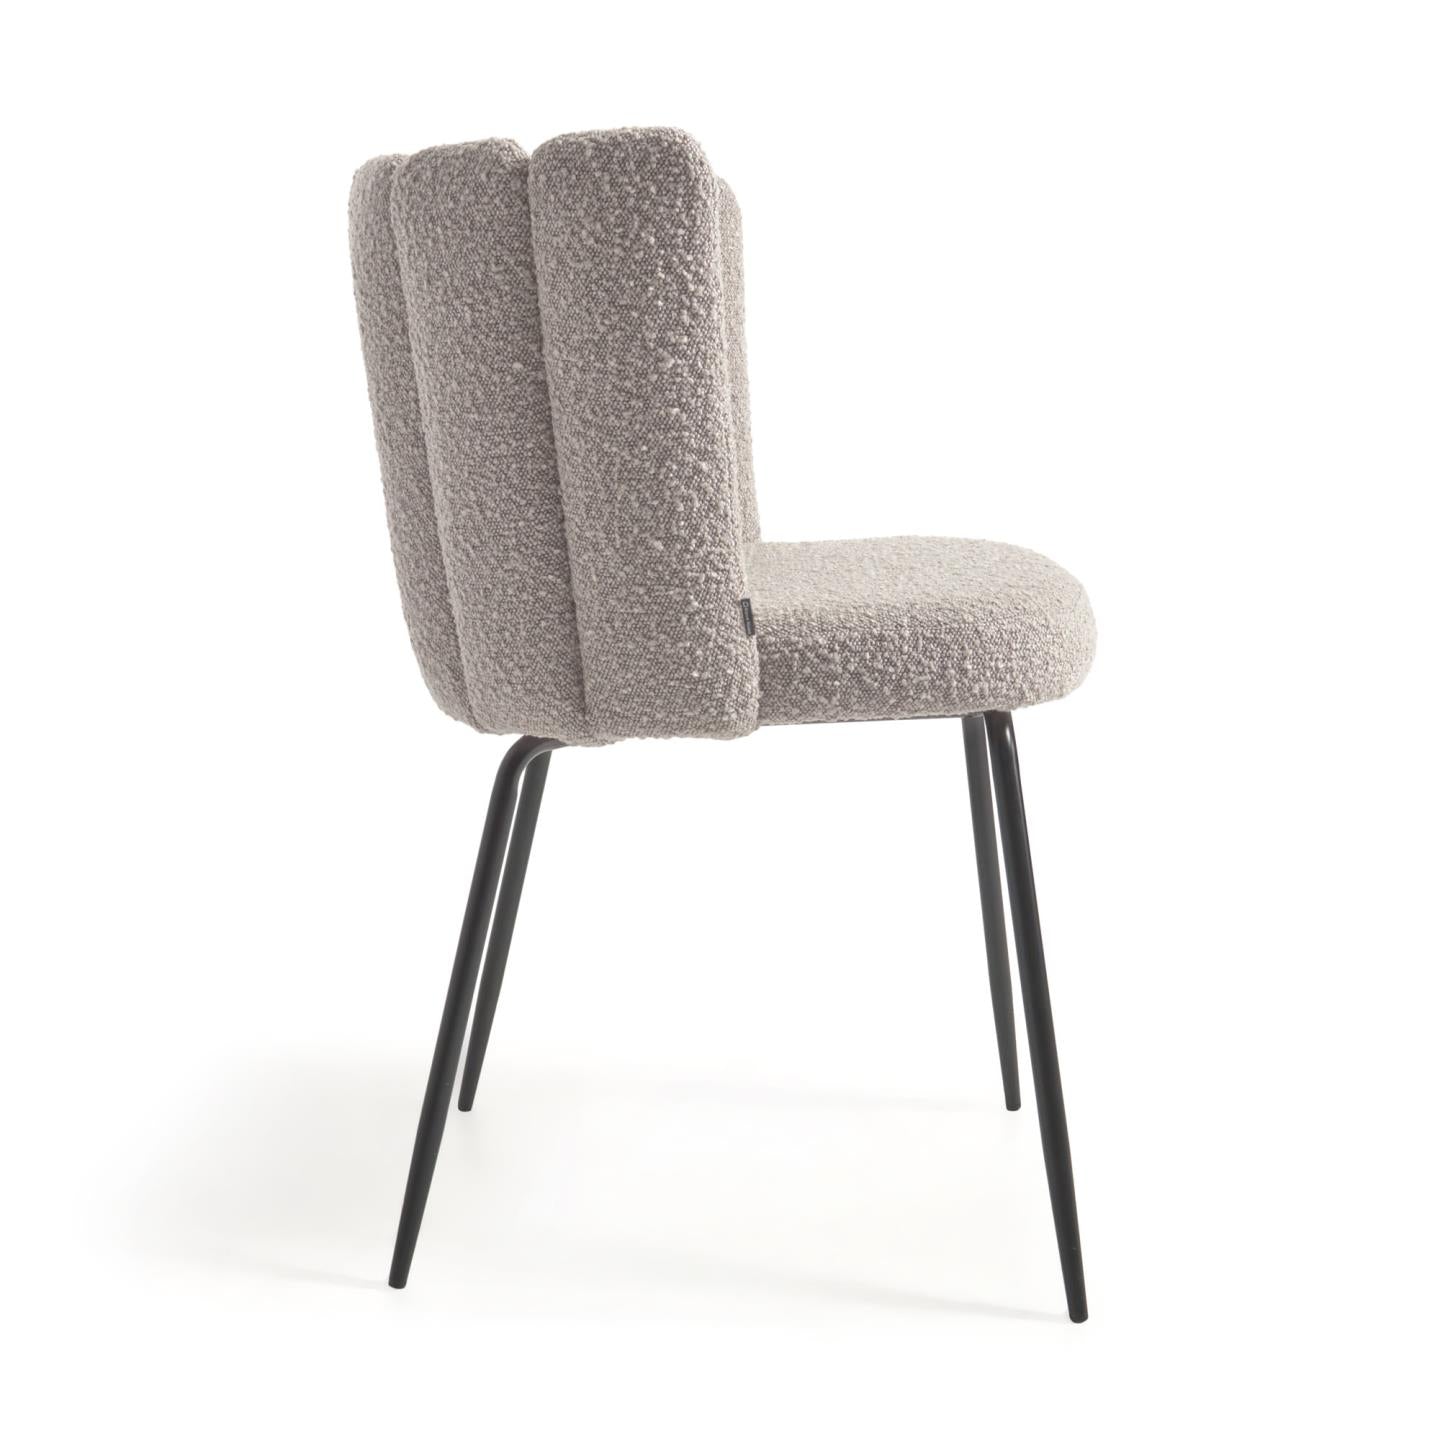 Aniela chair in gray bouclé and metal finish with black finish FR